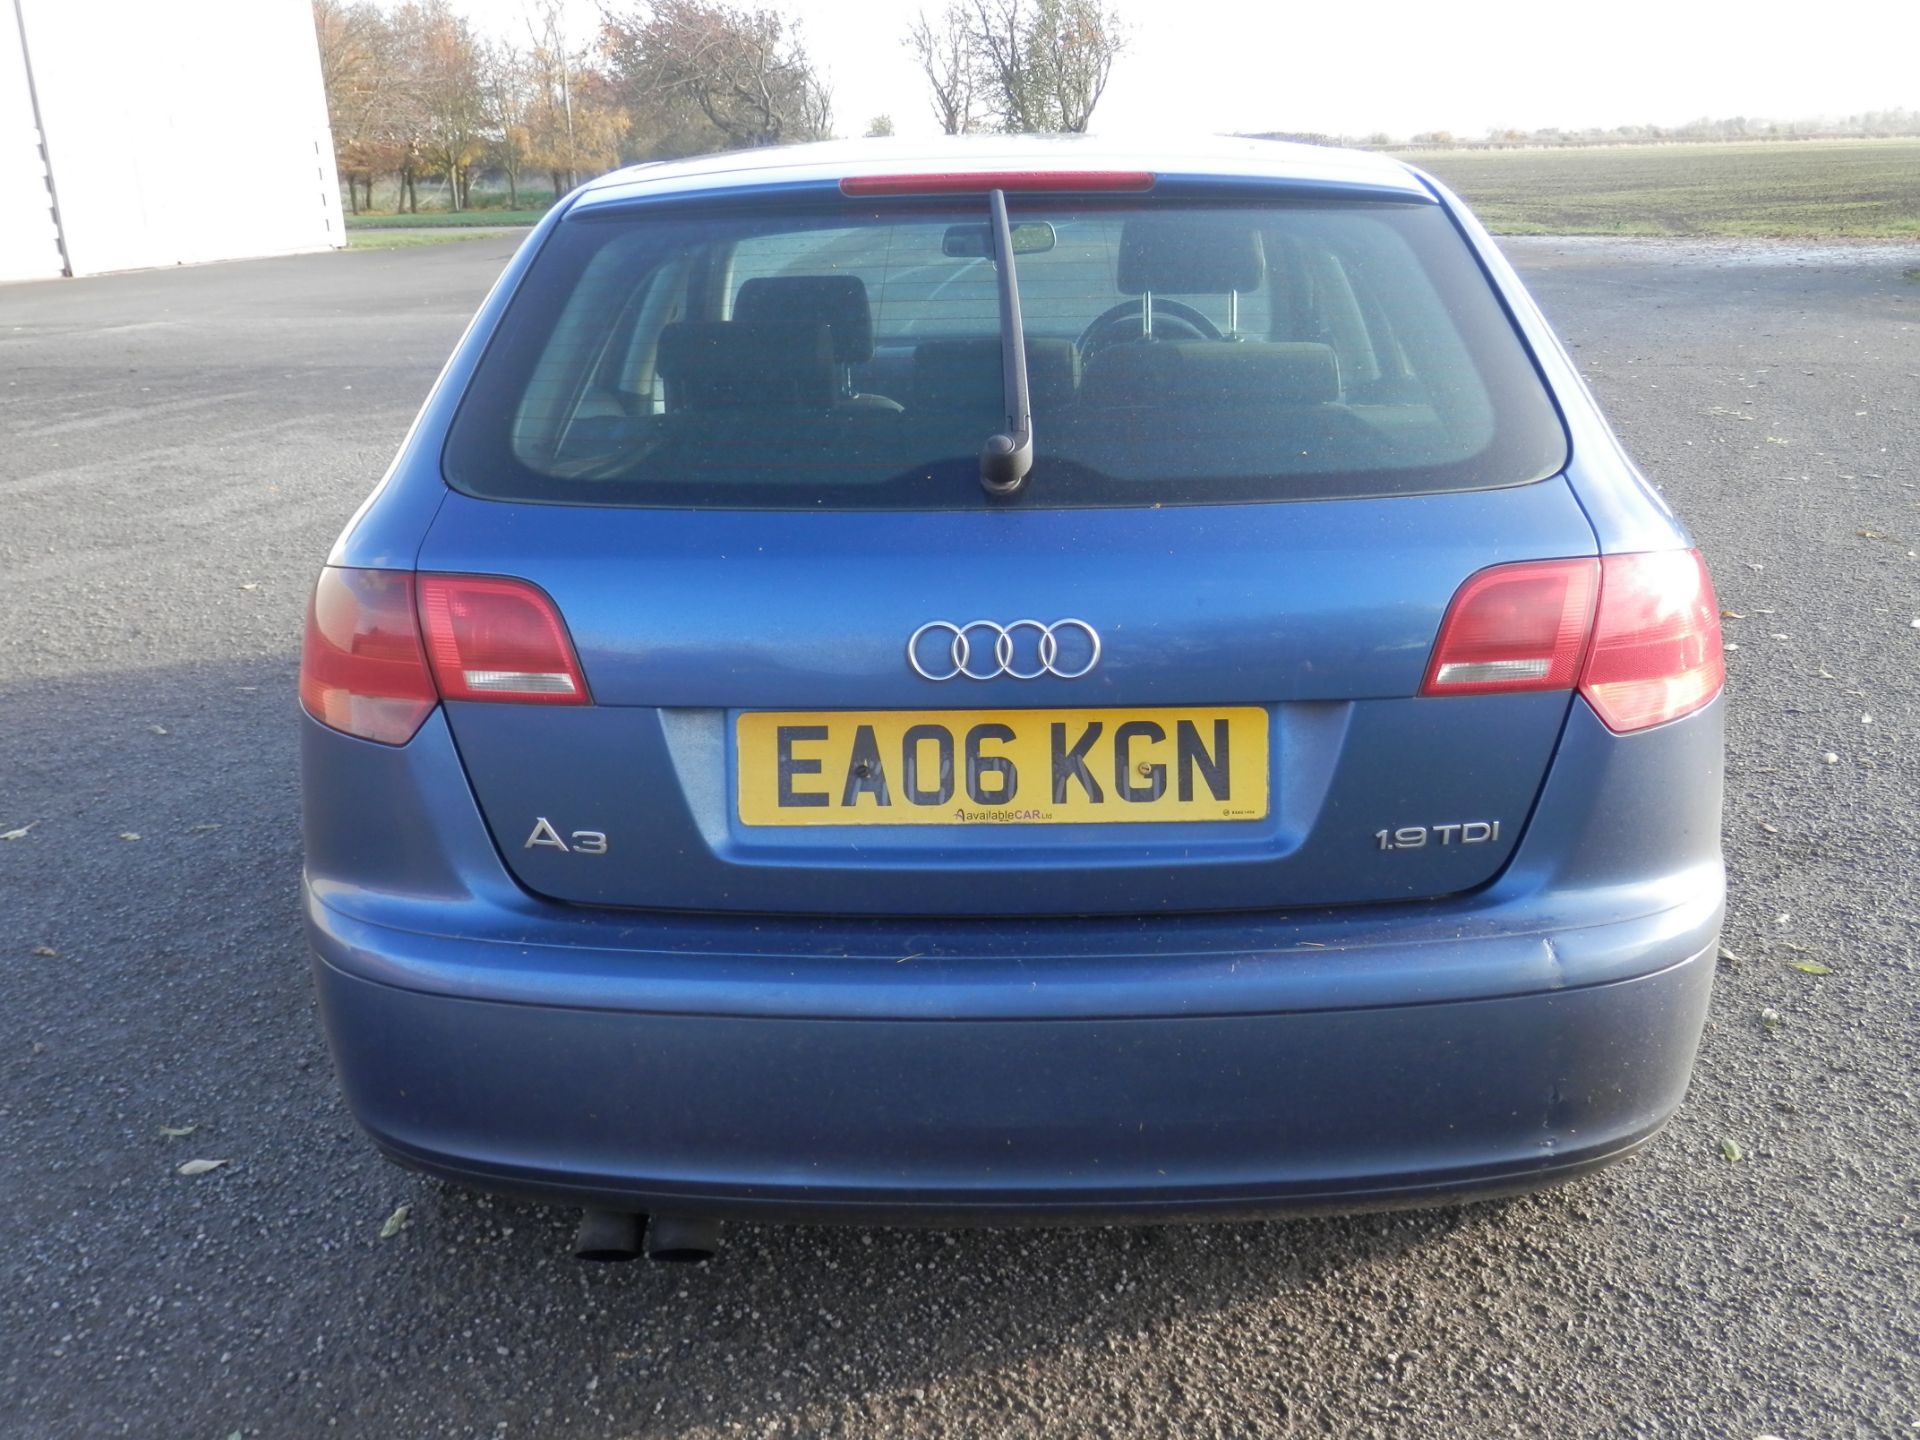 2006/06 AUDI A3 1.9 TDI, MOT JAN 2014, 170K MILES, HPI CLEAR. DRIVES VERY WELL. - Image 6 of 18